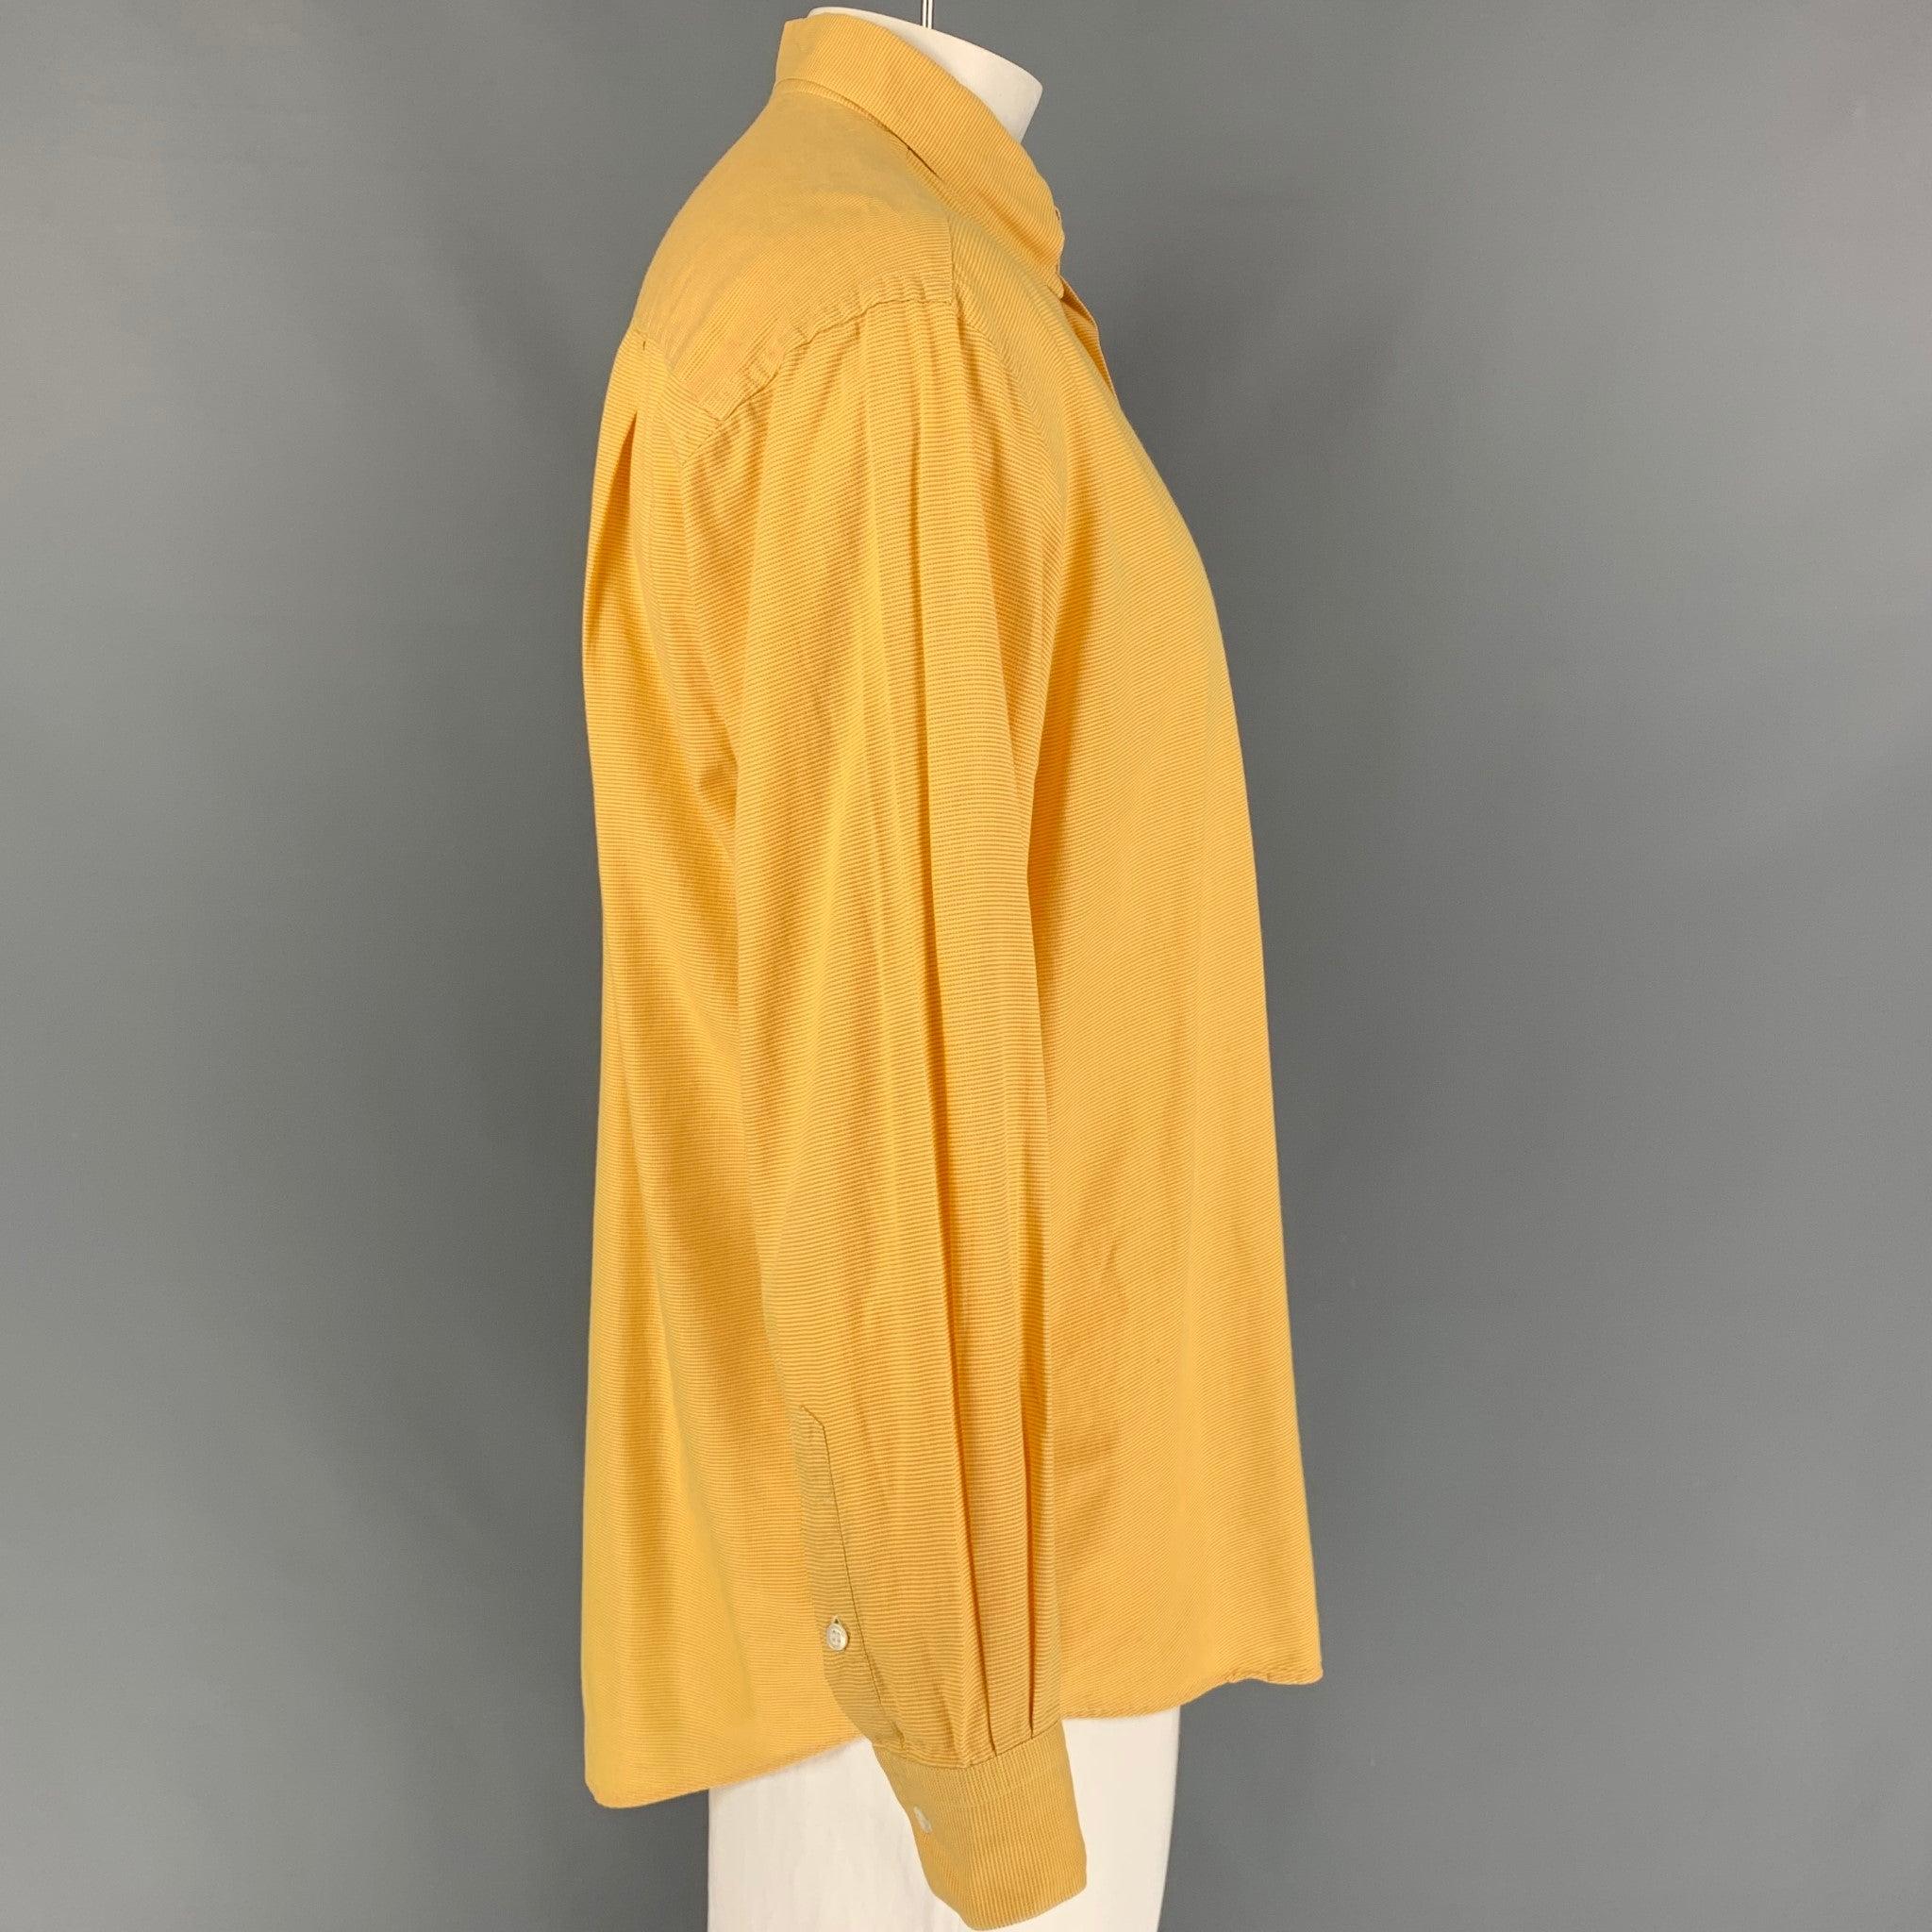 ERMENEGILDO ZEGNA 'Soft' long sleeve shirt comes in a yellow nailhead cotton featuring a button down collar, front pocket, and a button up closure.
Very Good
Pre-Owned Condition. 

Marked:   41/16 

Measurements: 
 
Shoulder:
22 inches  Chest: 48